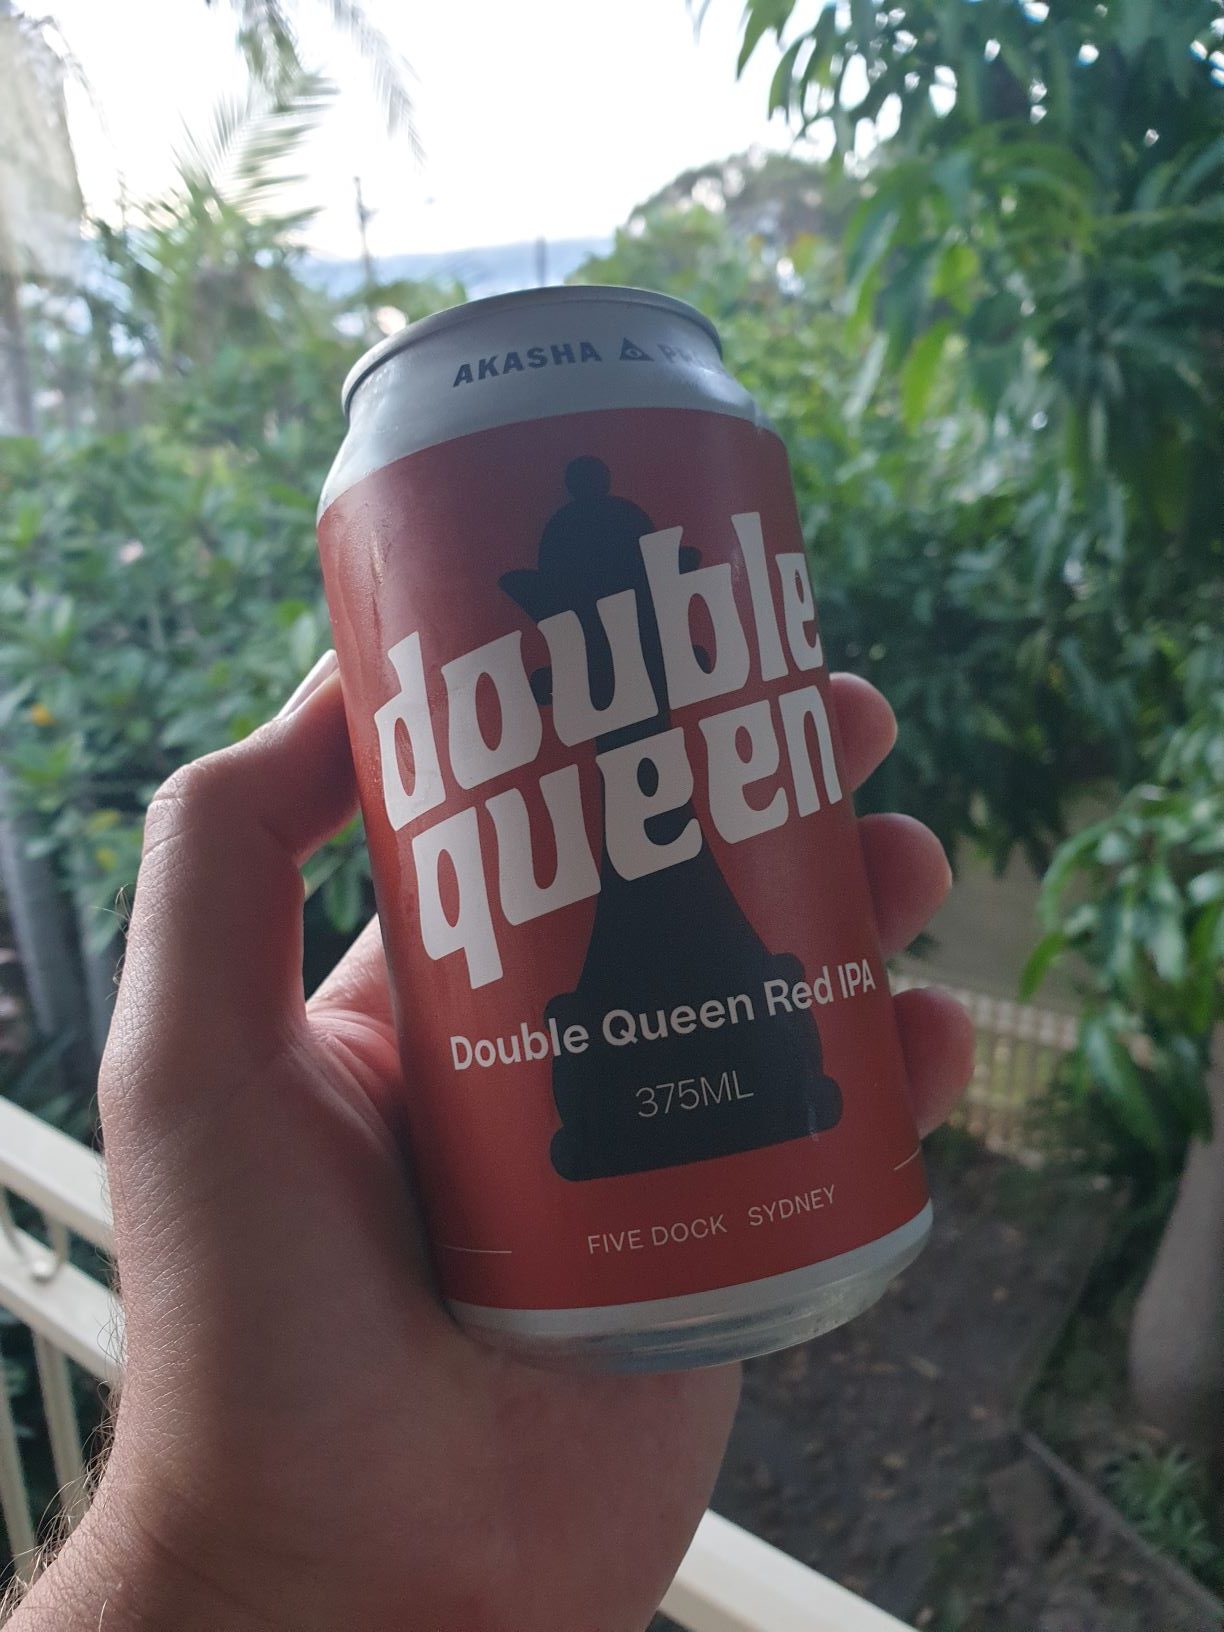 Double Queen Red IPA by Akasha Brewing